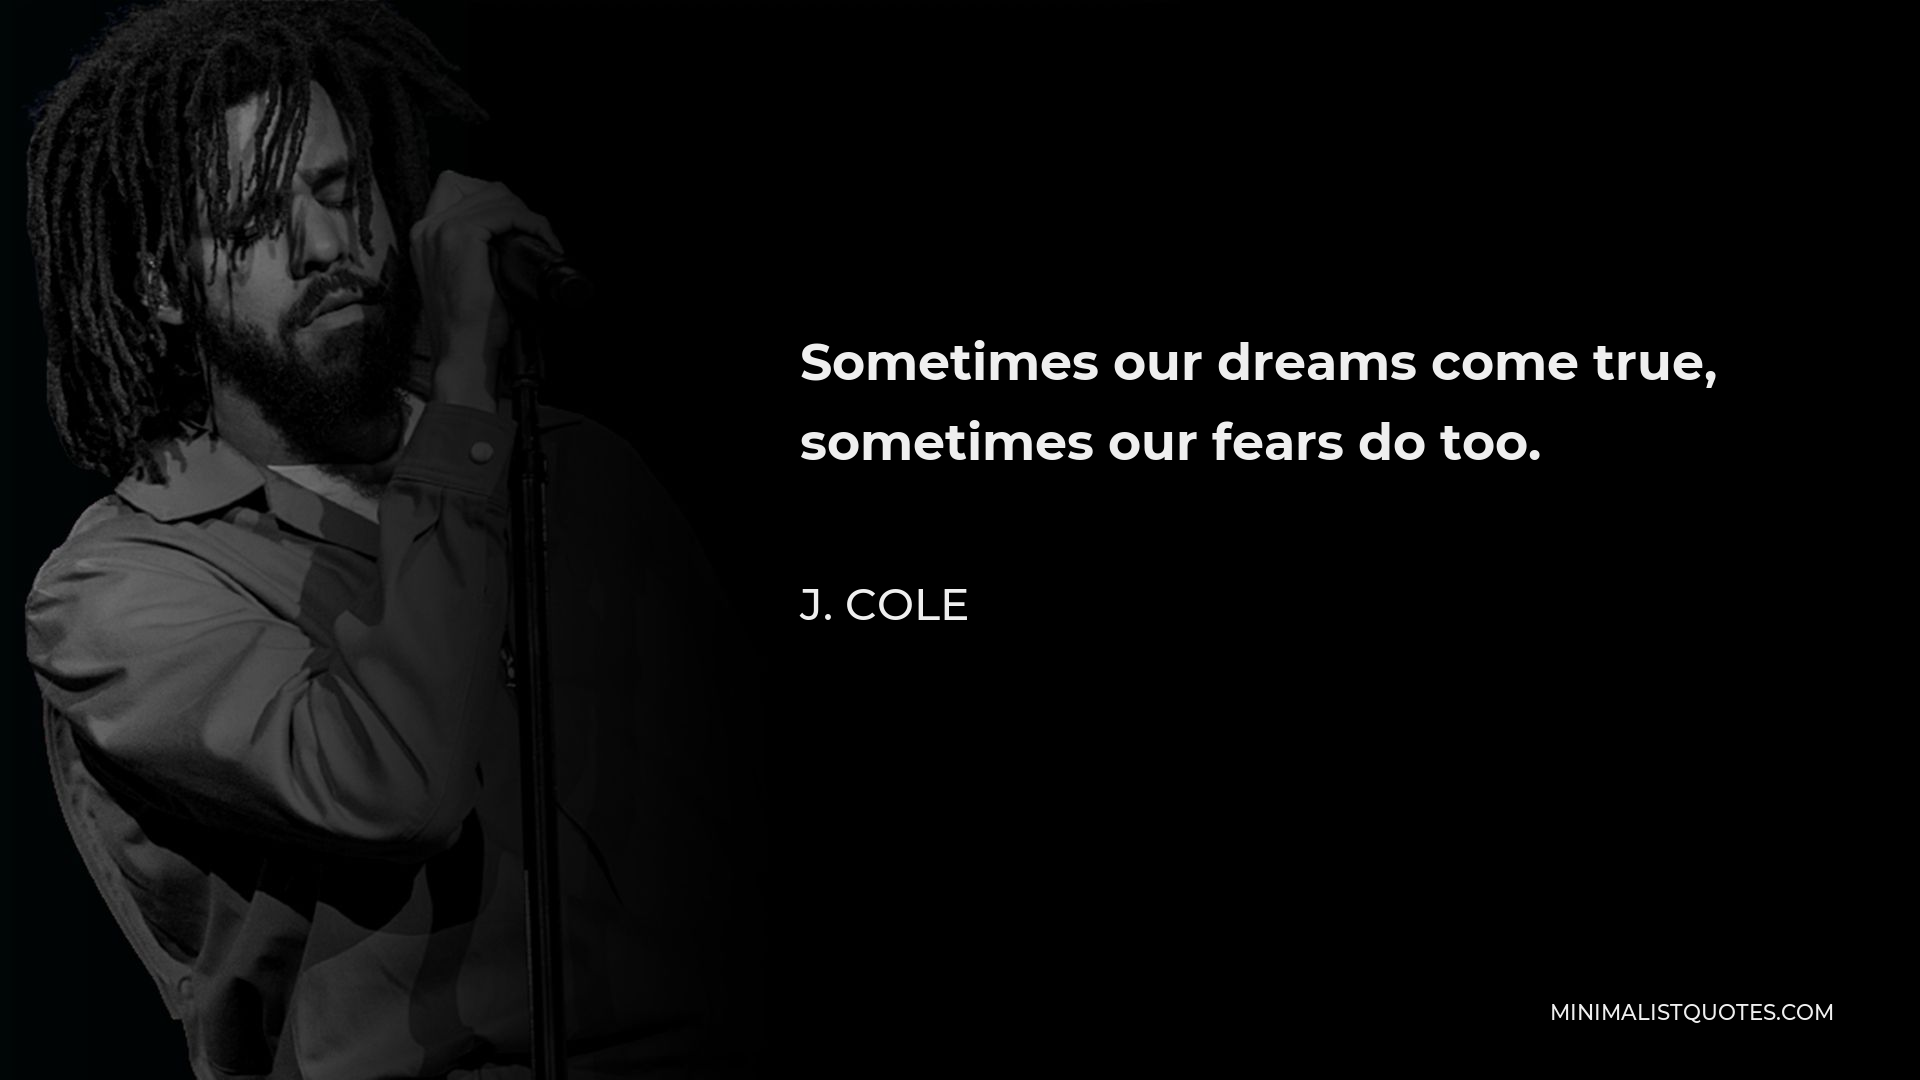 J. Cole Quote - Sometimes our dreams come true, sometimes our fears do too.